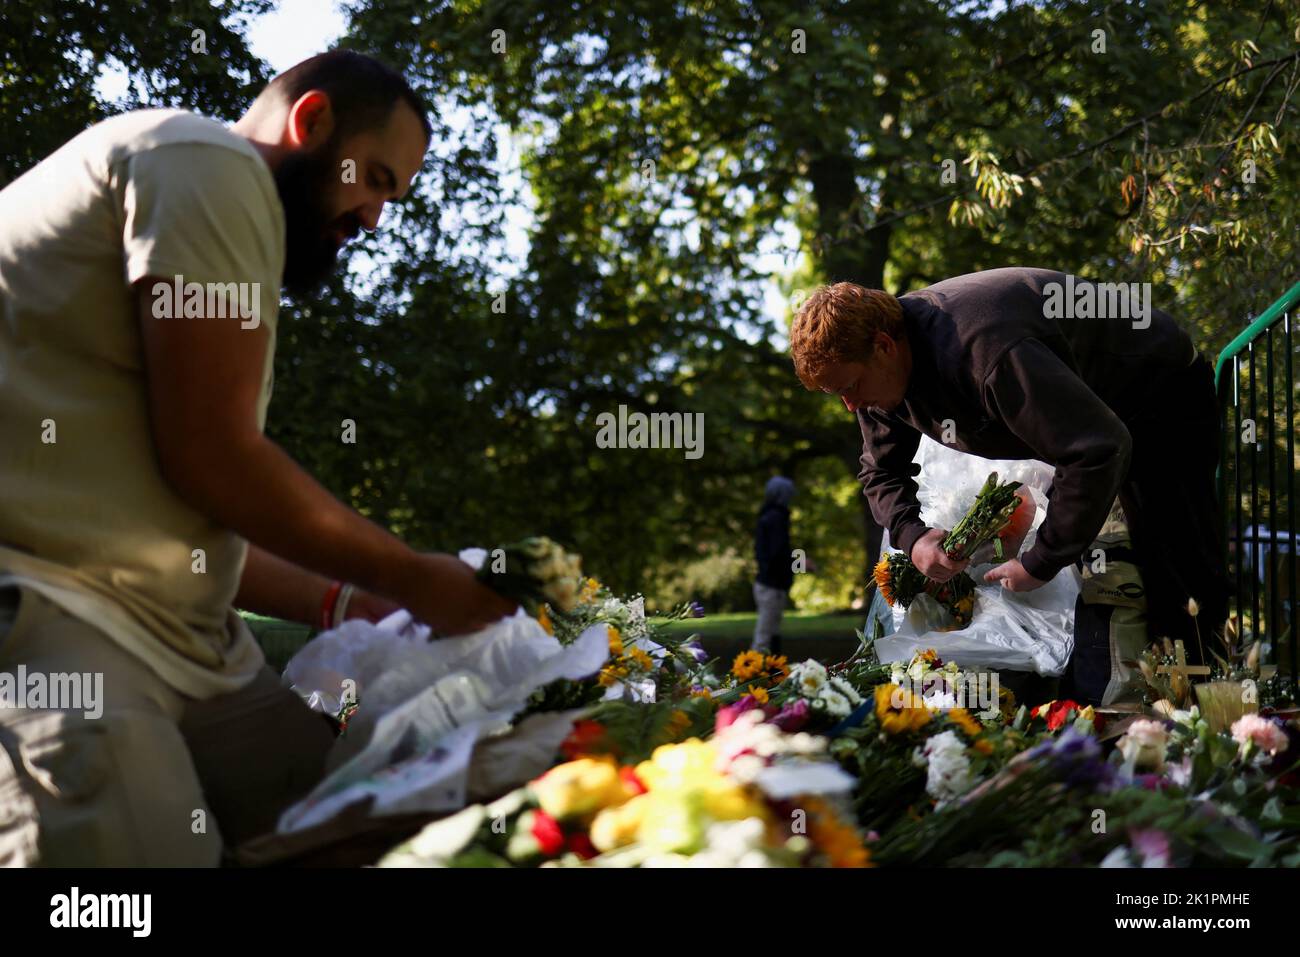 Volunteers remove packaging from floral tributes, following the funeral of Britain's Queen Elizabeth, in Green Park in London, Britain September 20, 2022. REUTERS/Tom Nicholson Stock Photo